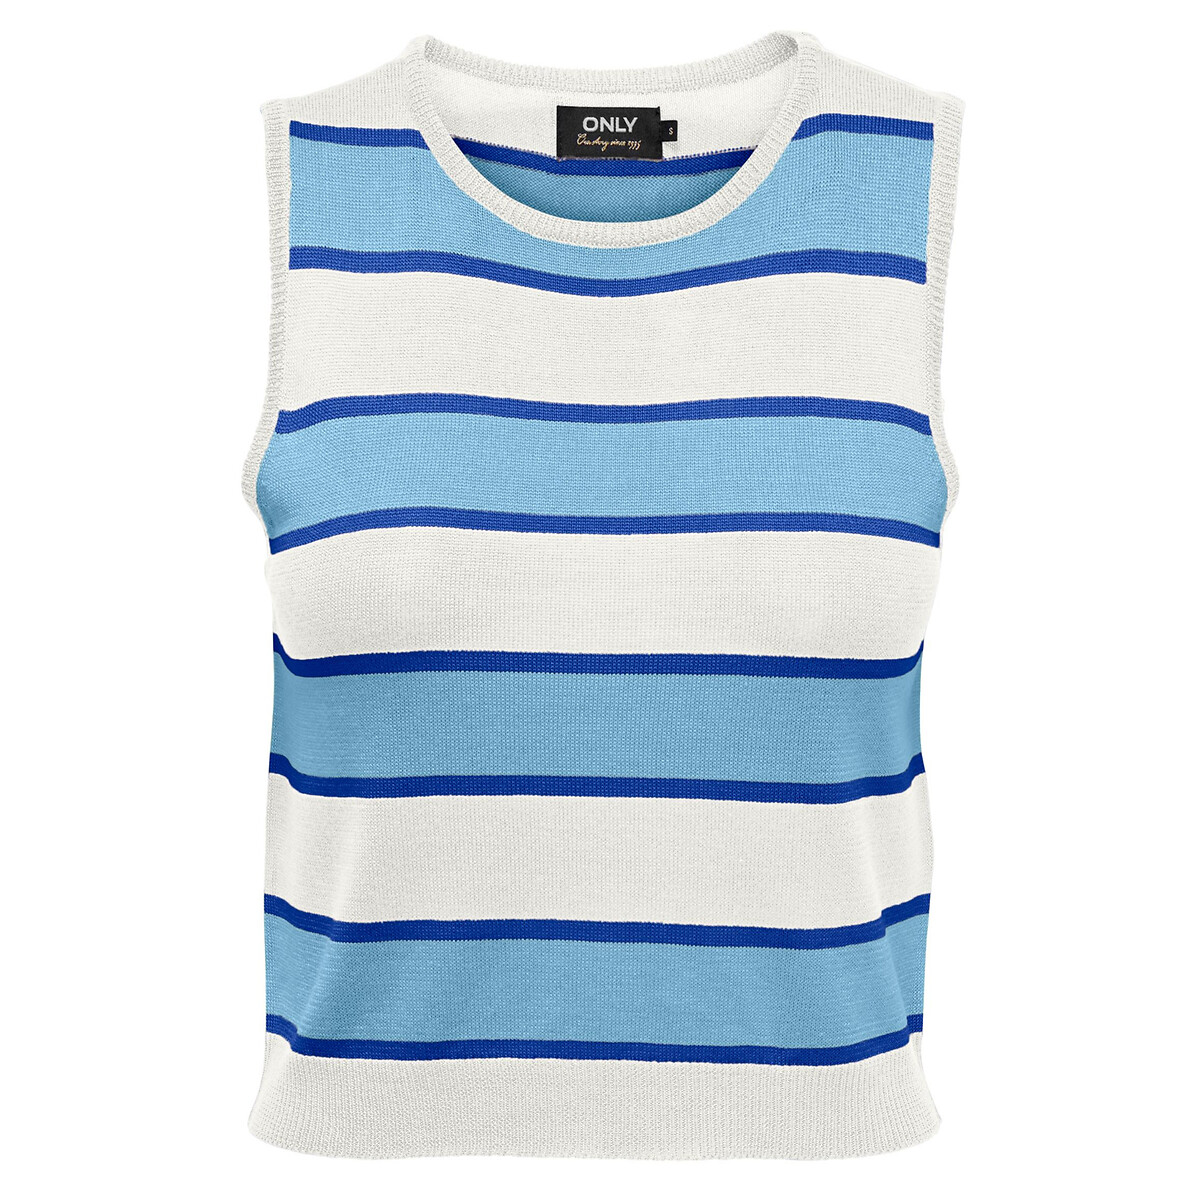 Cropped Knitted Vest Top in Striped Print